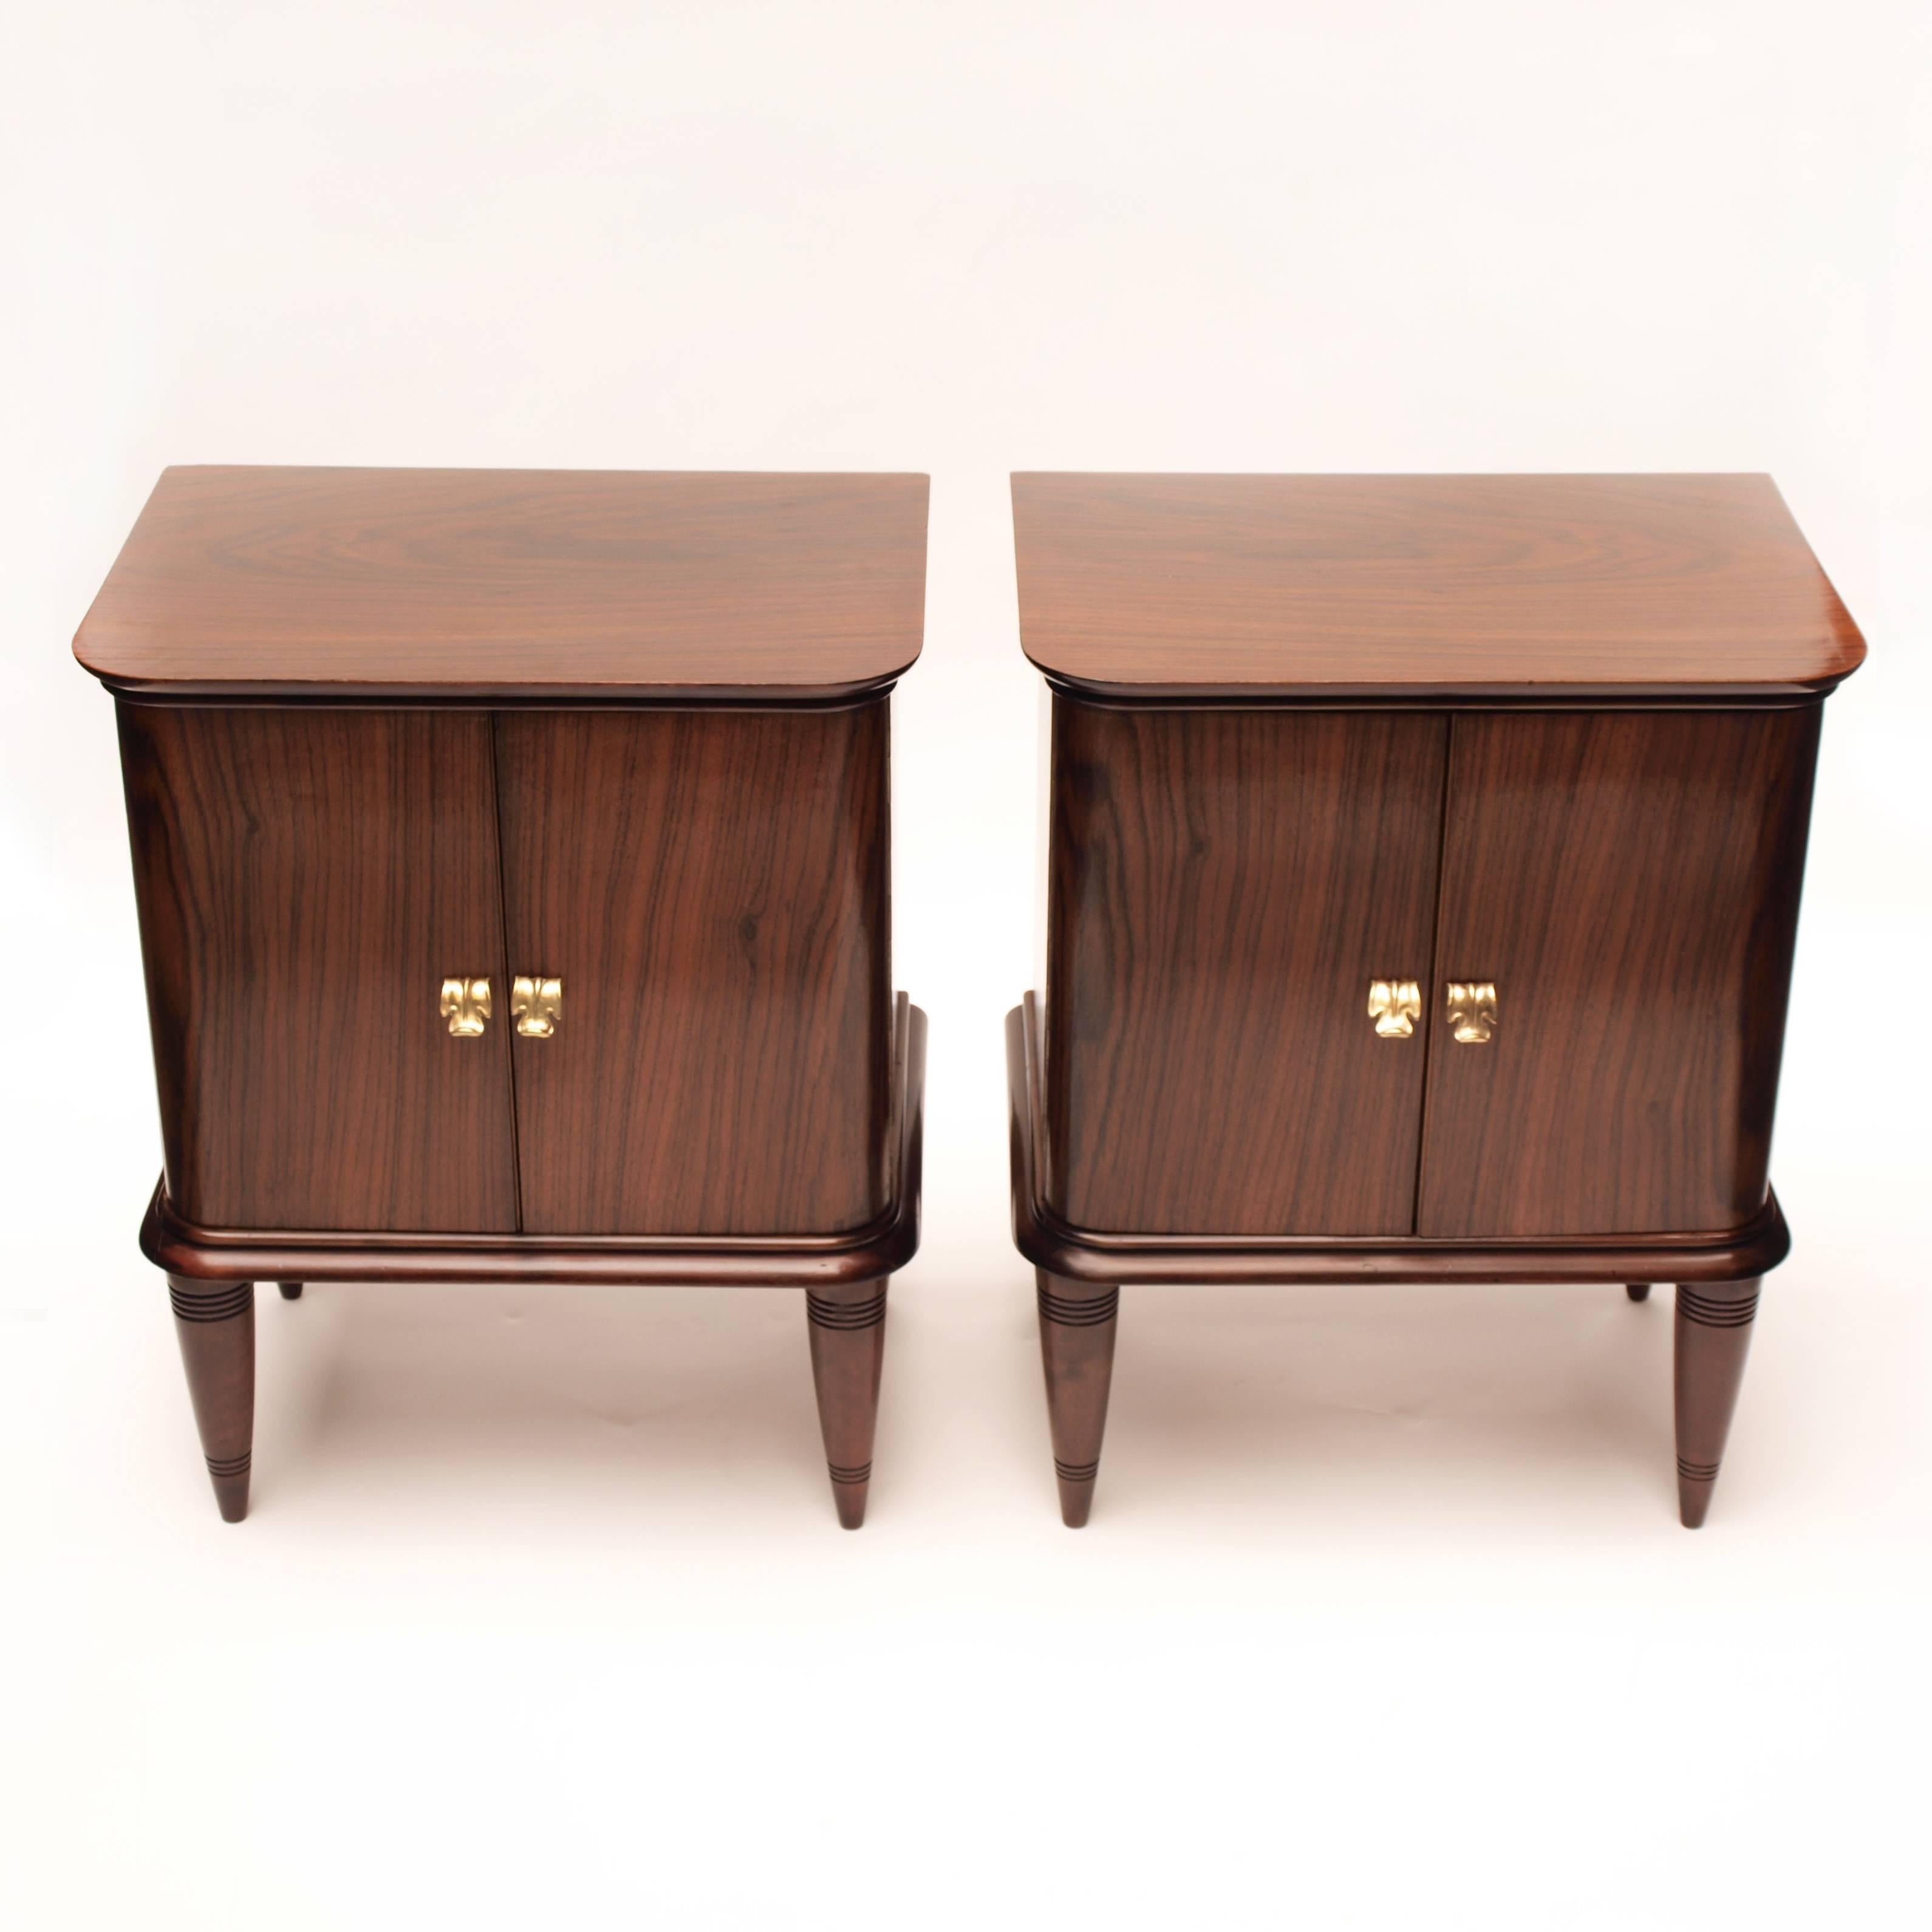 Milanese architect and designer Paolo Buffa (1903-1970) is a master of sophisticated, inventive classicism.
His thoughtful simplicity of design is embodied in this fine pair of nightstands finished in a smooth rosewood veneer and adorned with brass